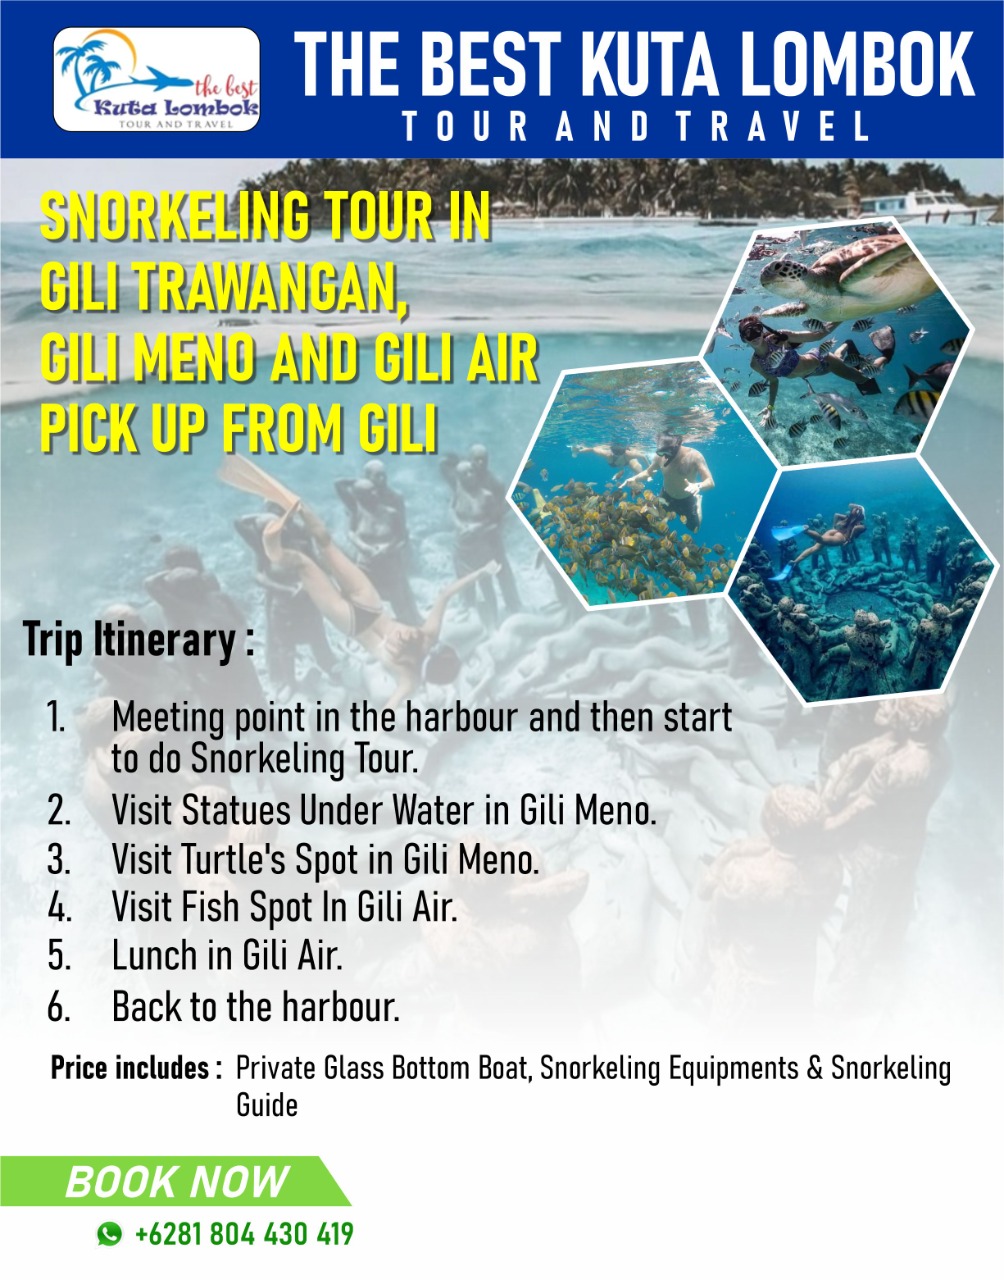 SNORKELING TOUR IN GILI ISLANDS PICK UP FROM GILI